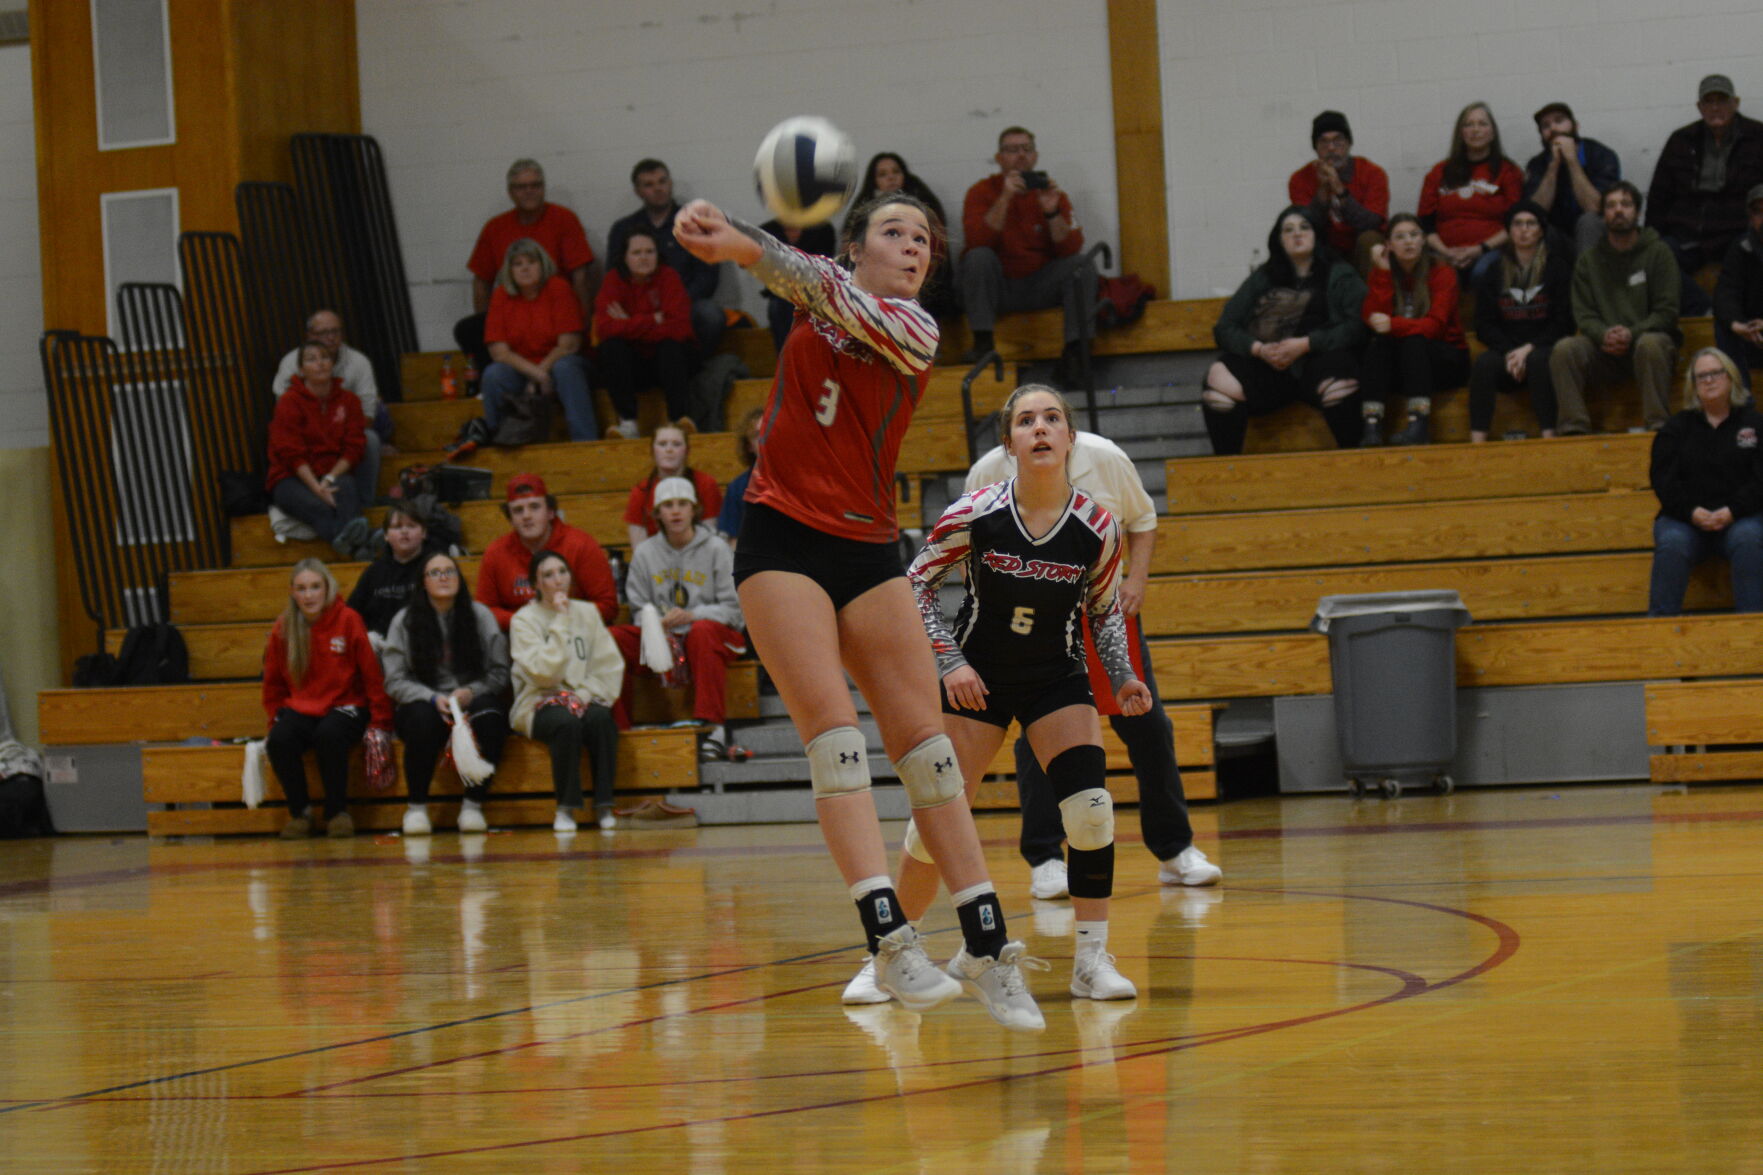 Saranac Lake Volleyball Team Faces Disappointing 3-0 Loss in Subregional Playoff Round